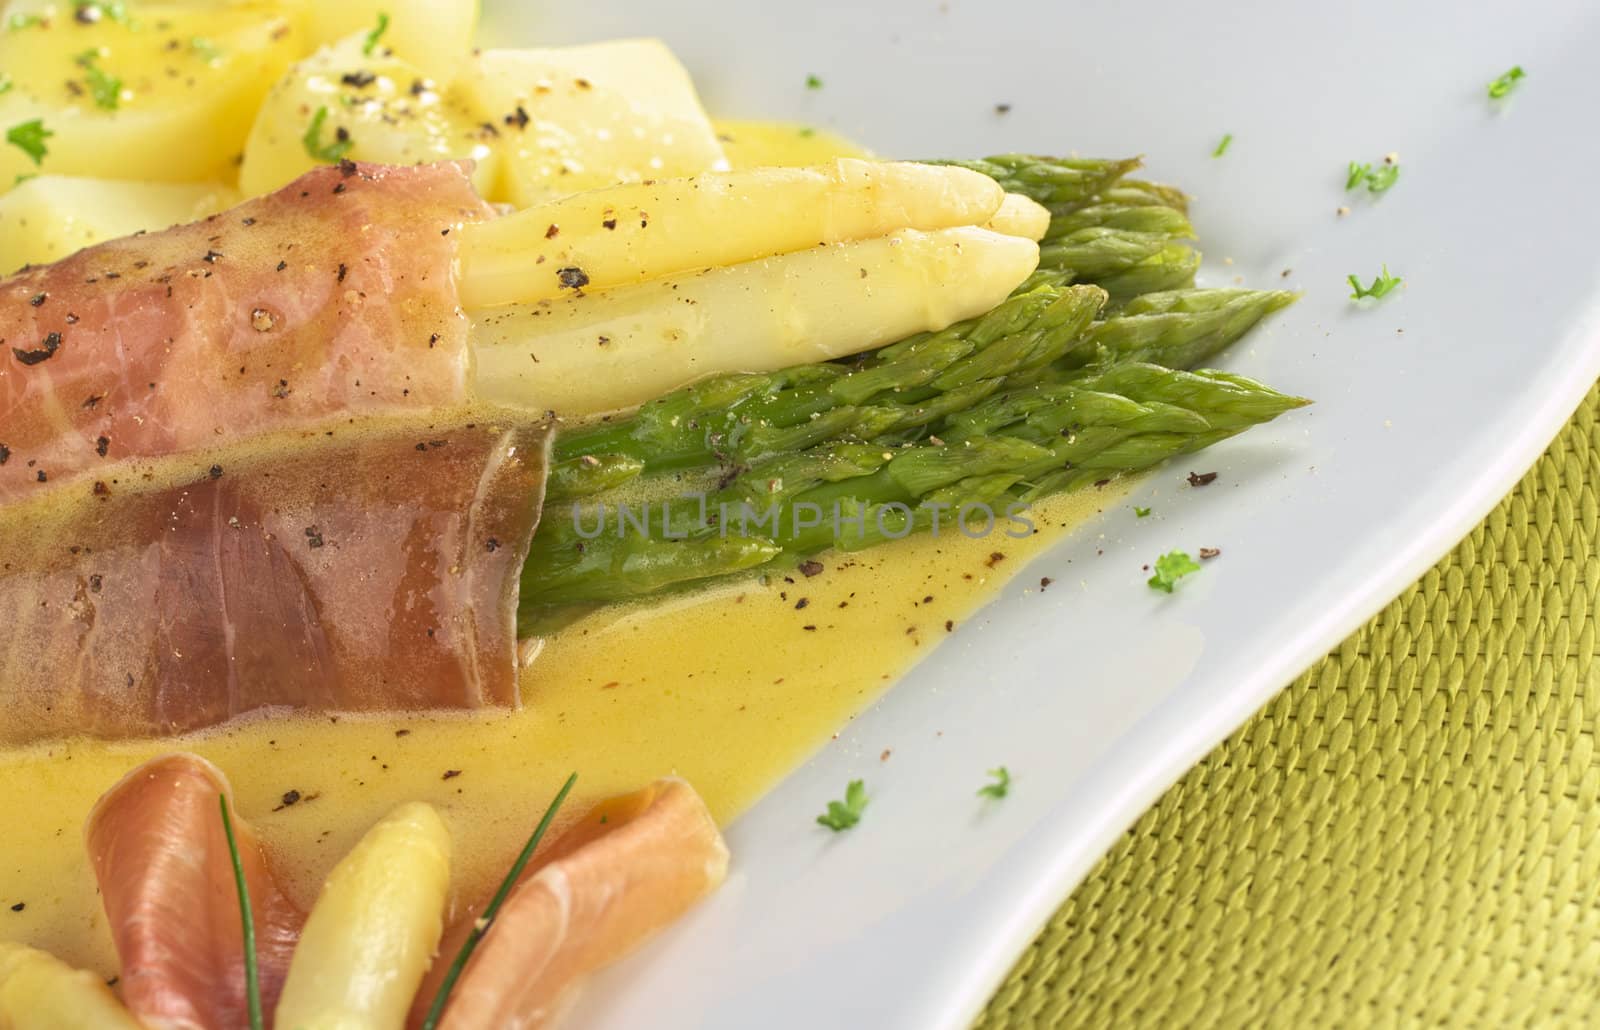 White and green asparagus wrapped in thin ham slices with Hollandaise sauce on top garnished with black pepper and parsley (Selective Focus, Focus on the front of the green and white asparagus and ham) 